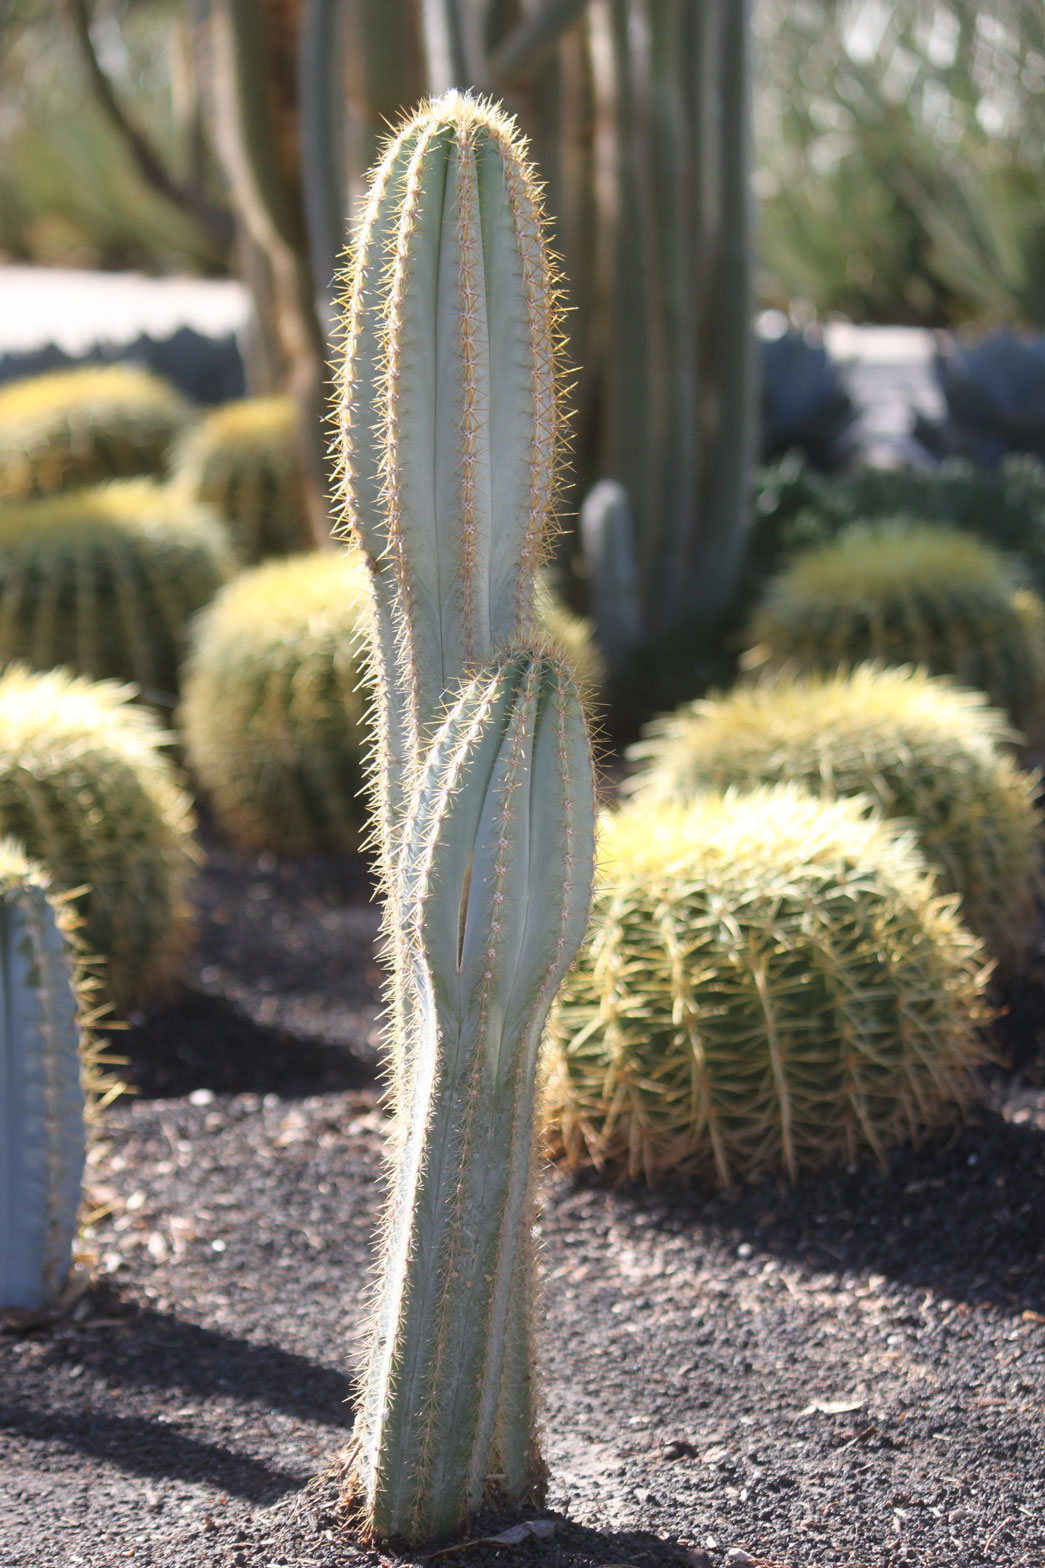 A Blue Torch cactus in the specimen bed.